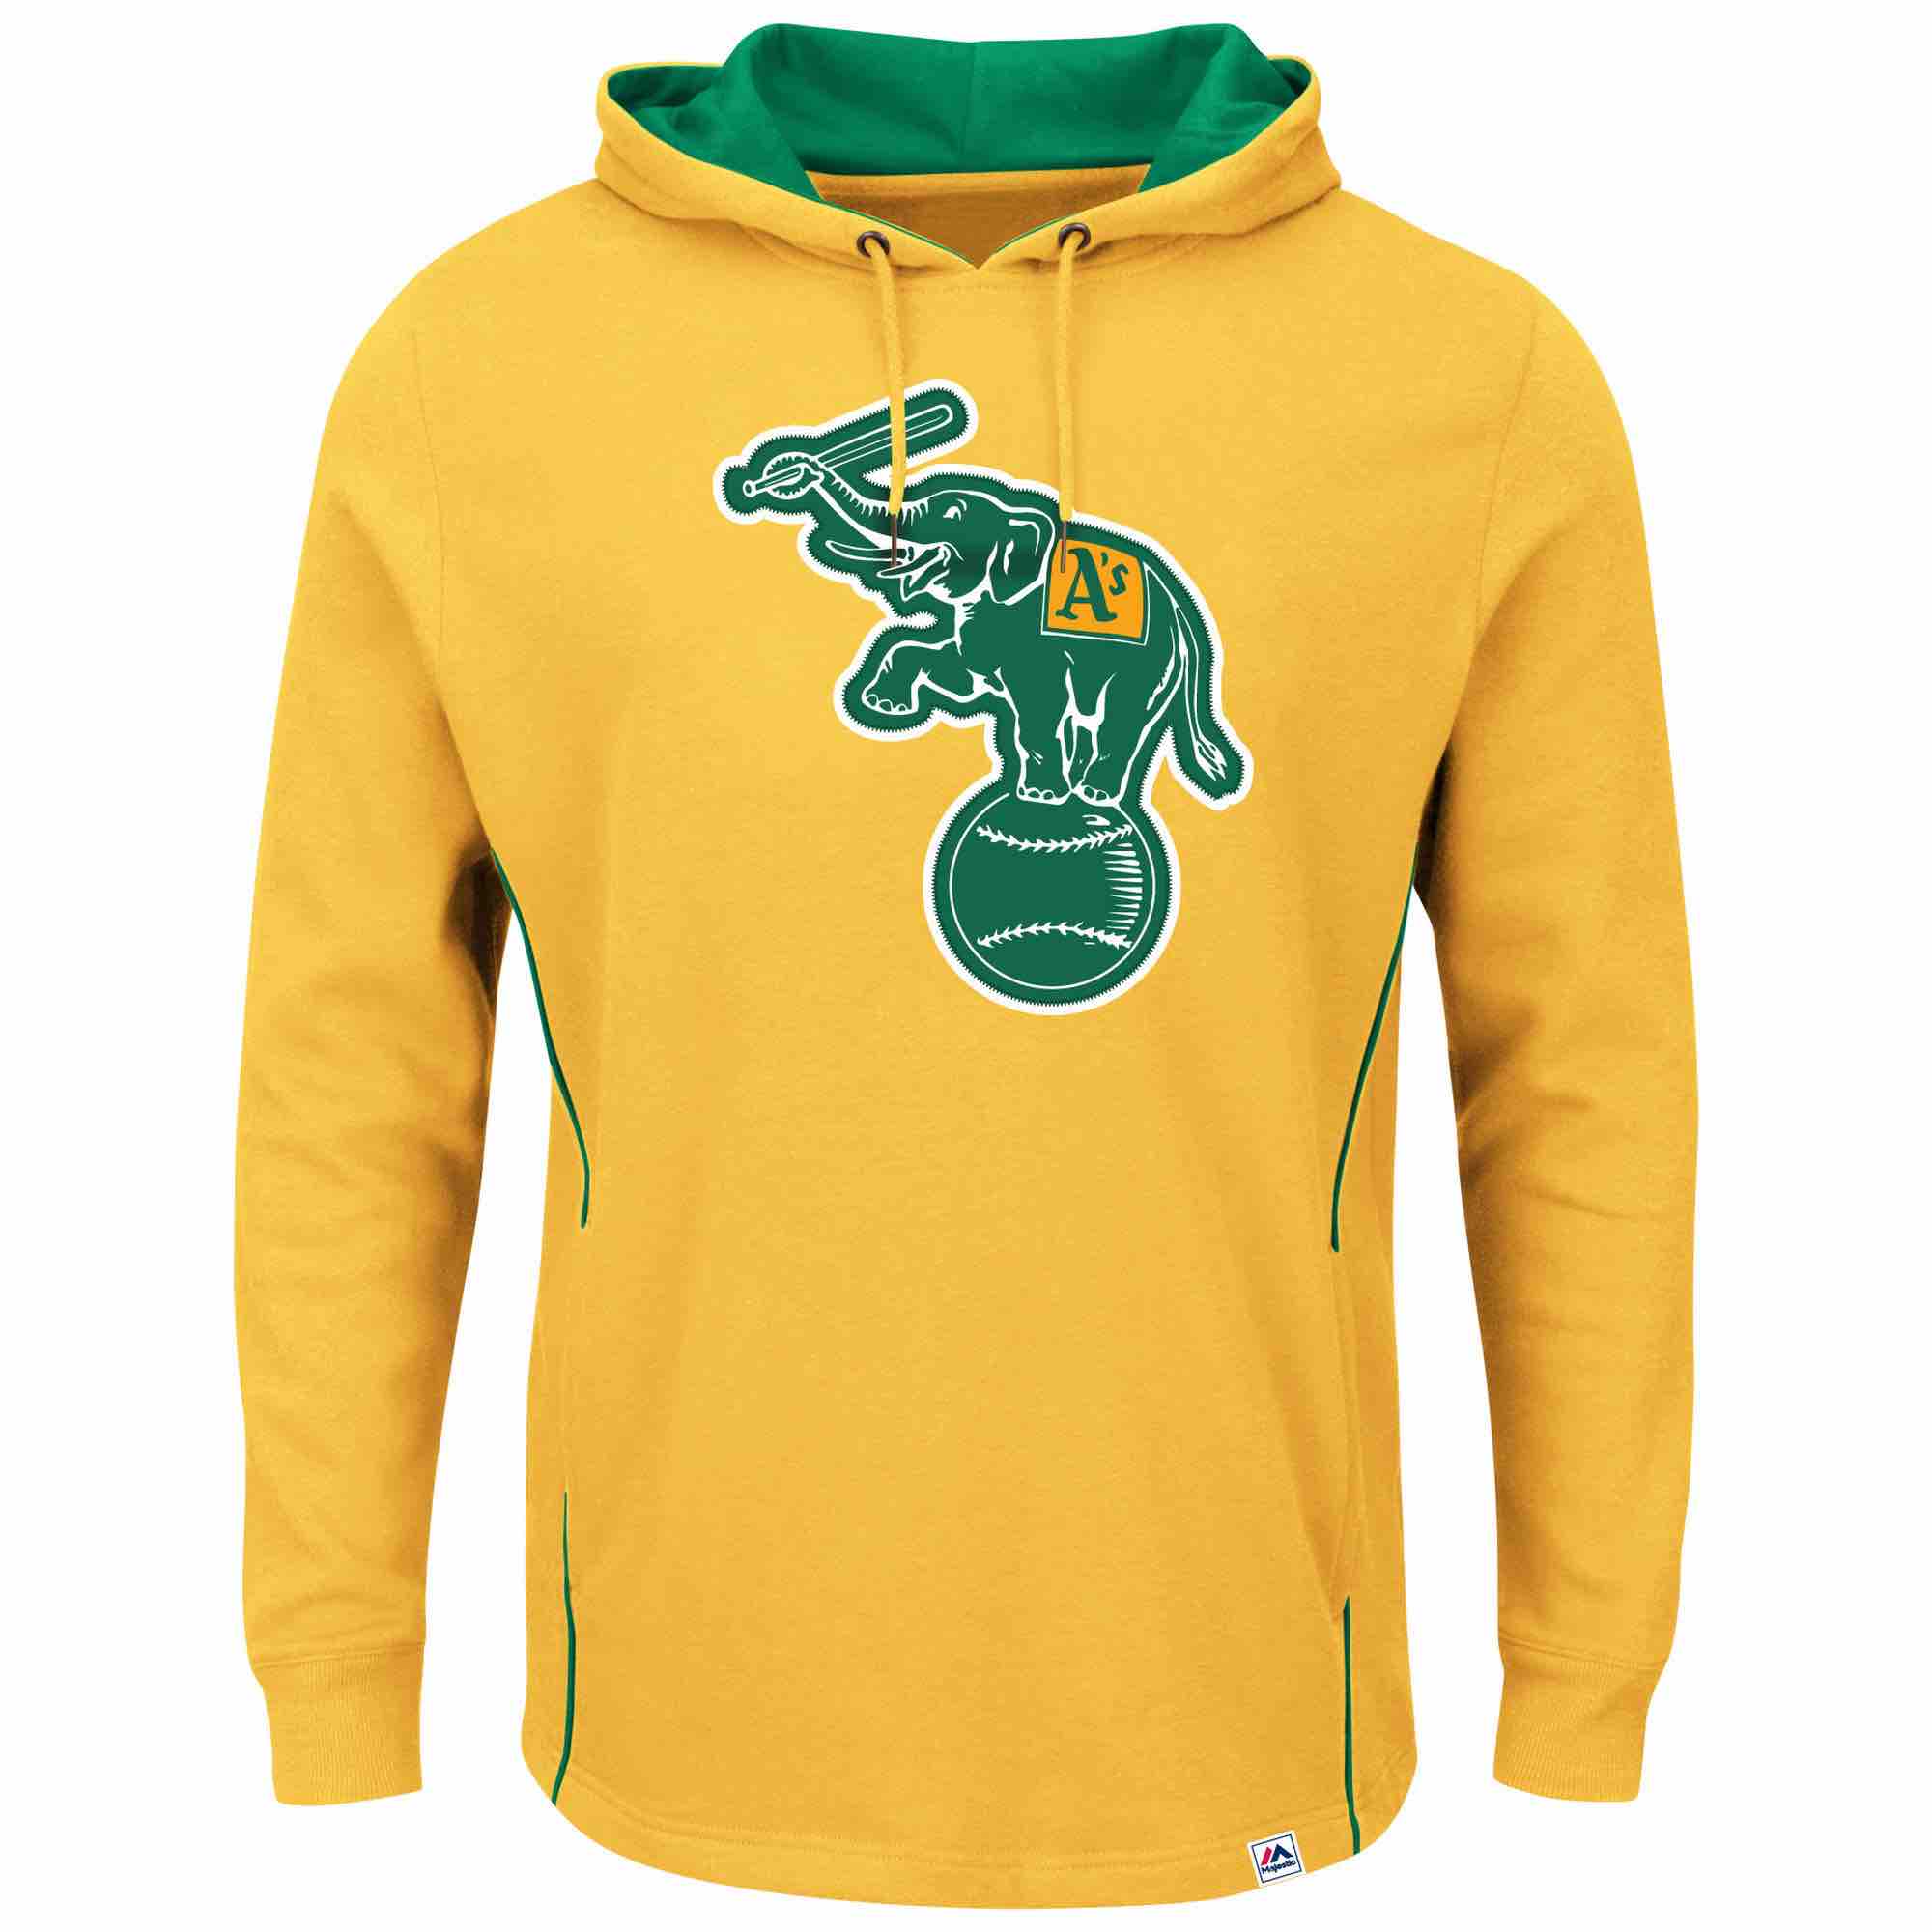 MLB Oakland Athletics Personalized Yellow Stitched Hoodie